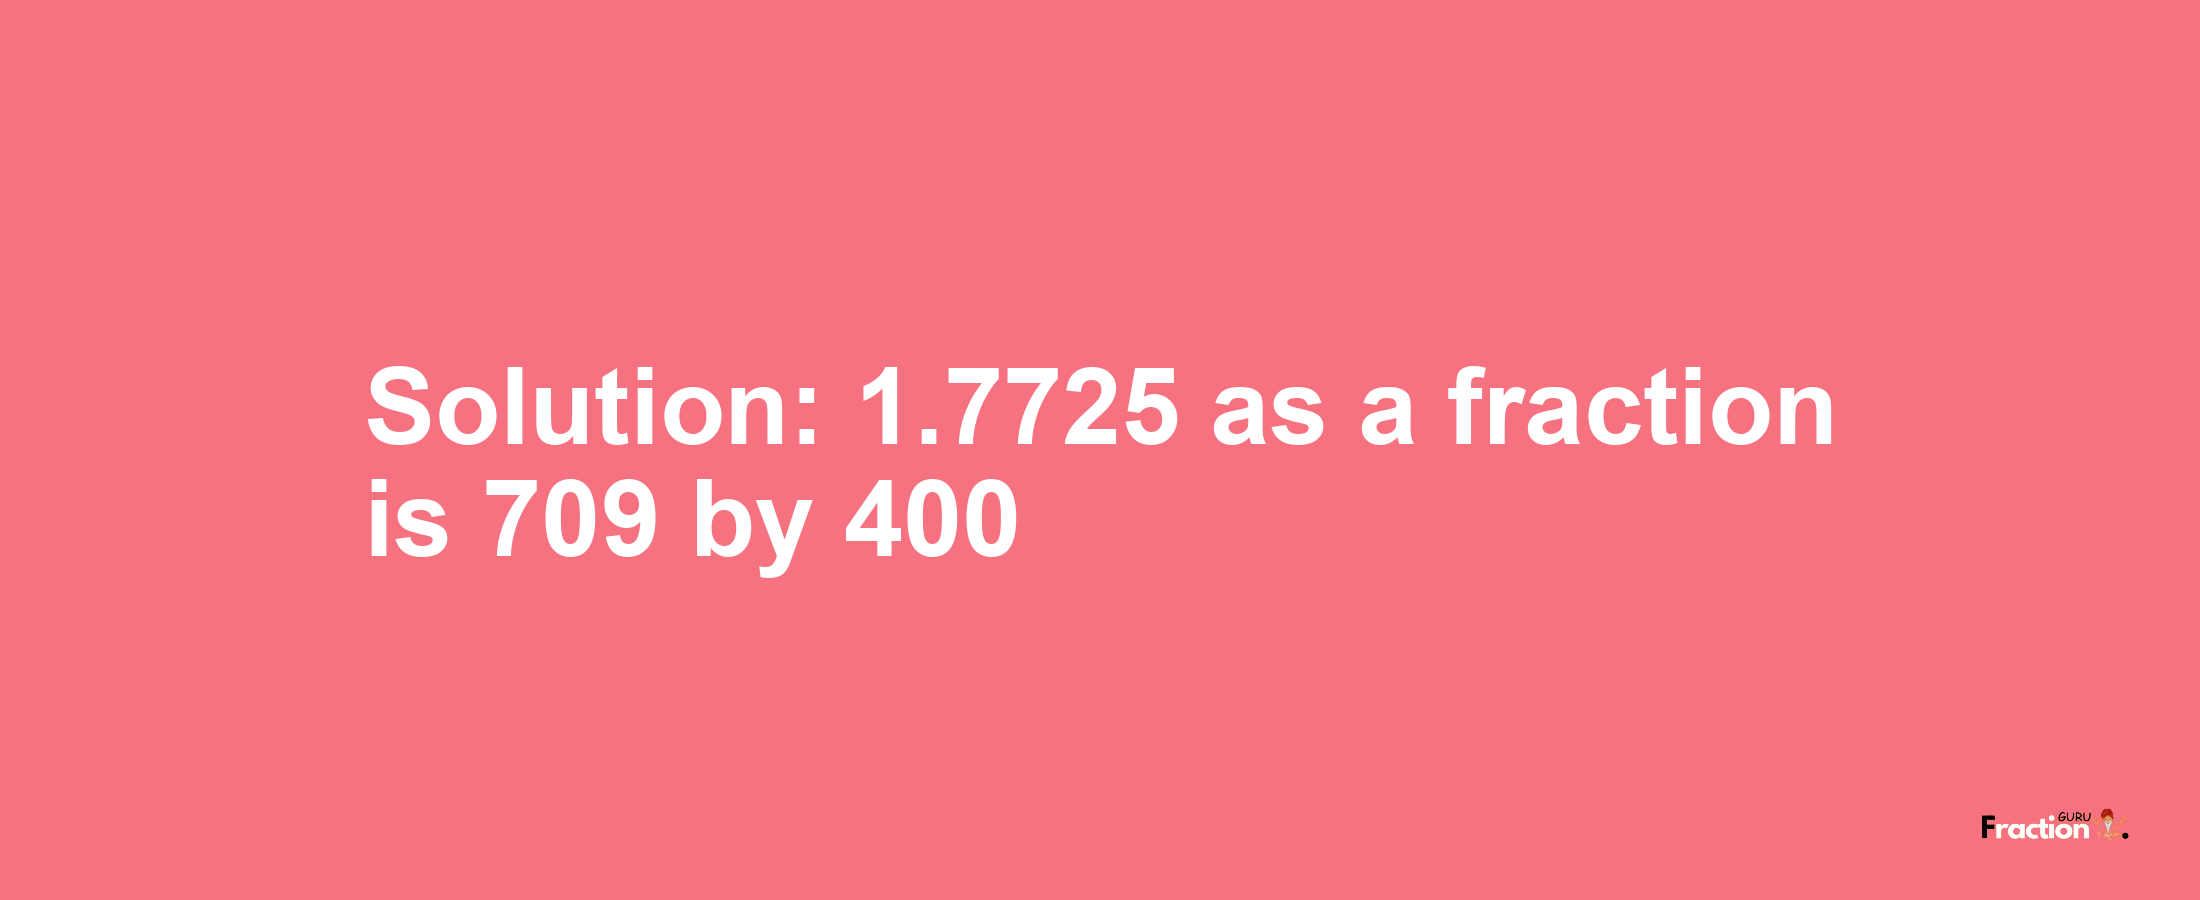 Solution:1.7725 as a fraction is 709/400